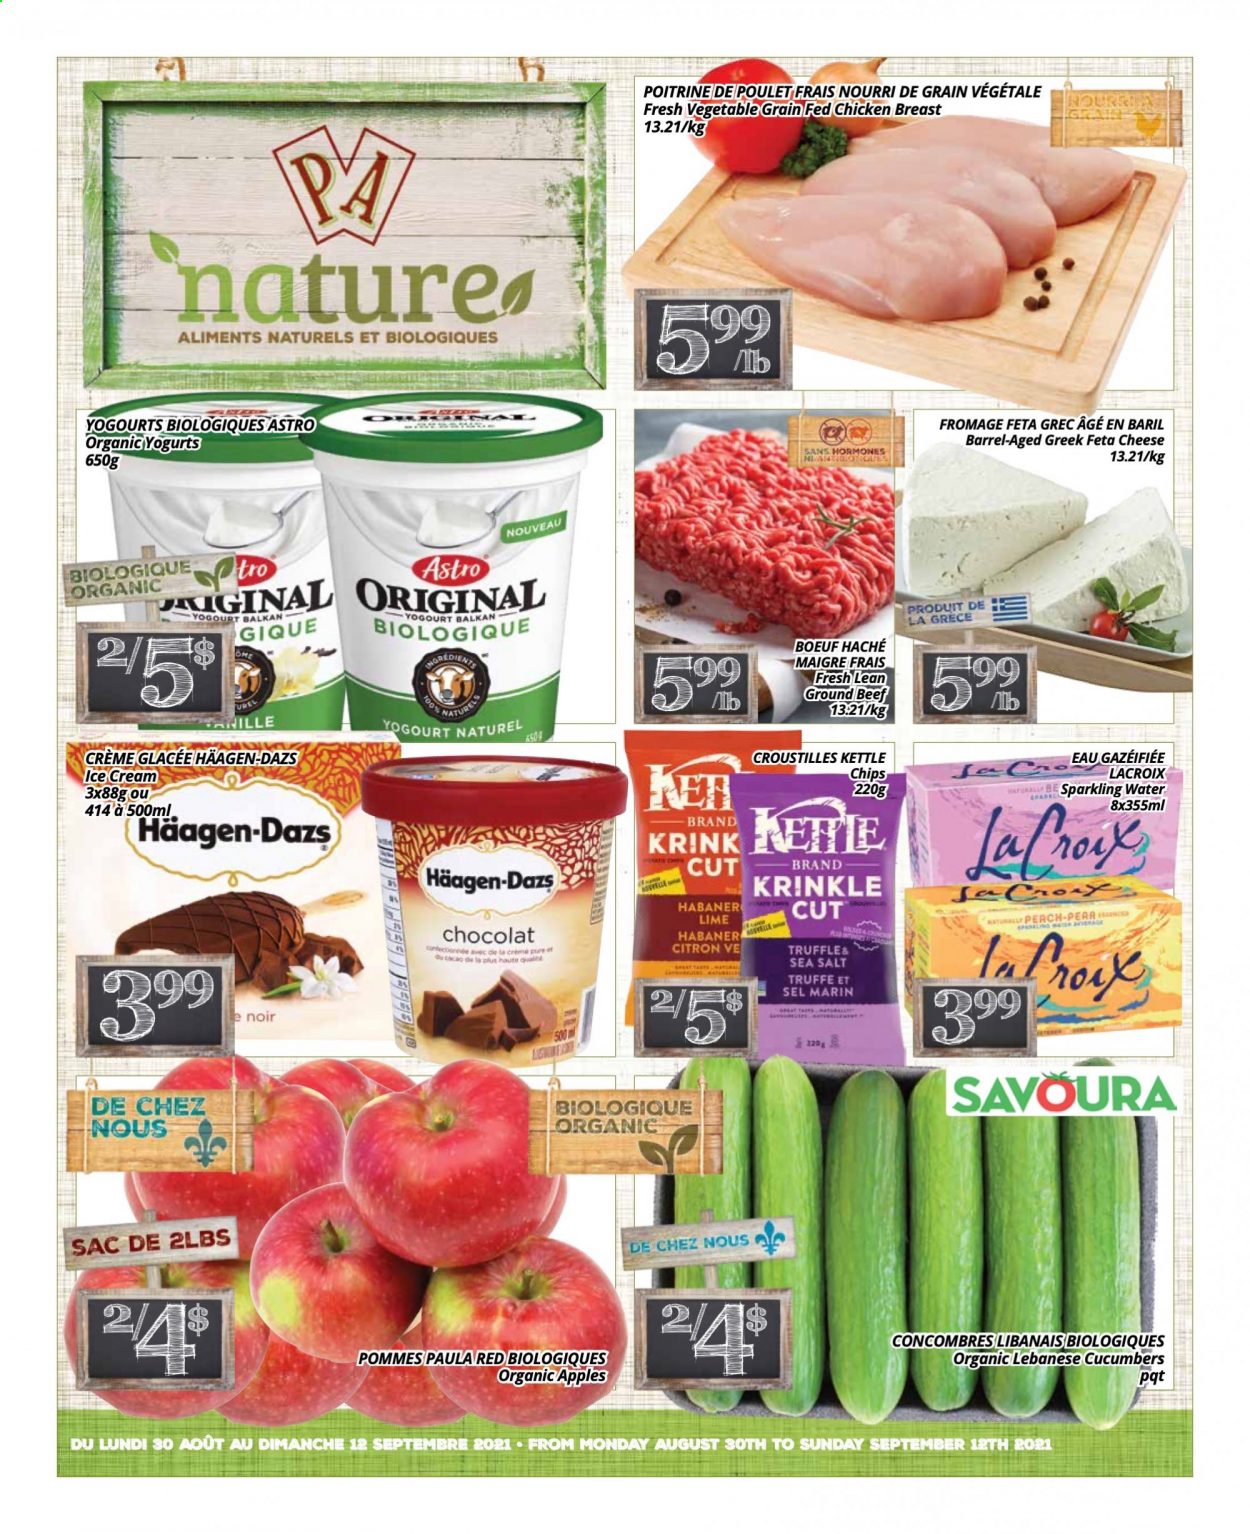 thumbnail - PA Nature Flyer - August 30, 2021 - September 12, 2021 - Sales products - cucumber, apples, perch, cheese, feta, ice cream, Häagen-Dazs, truffles, sparkling water, chicken breasts, chicken, beef meat, ground beef, chips. Page 1.